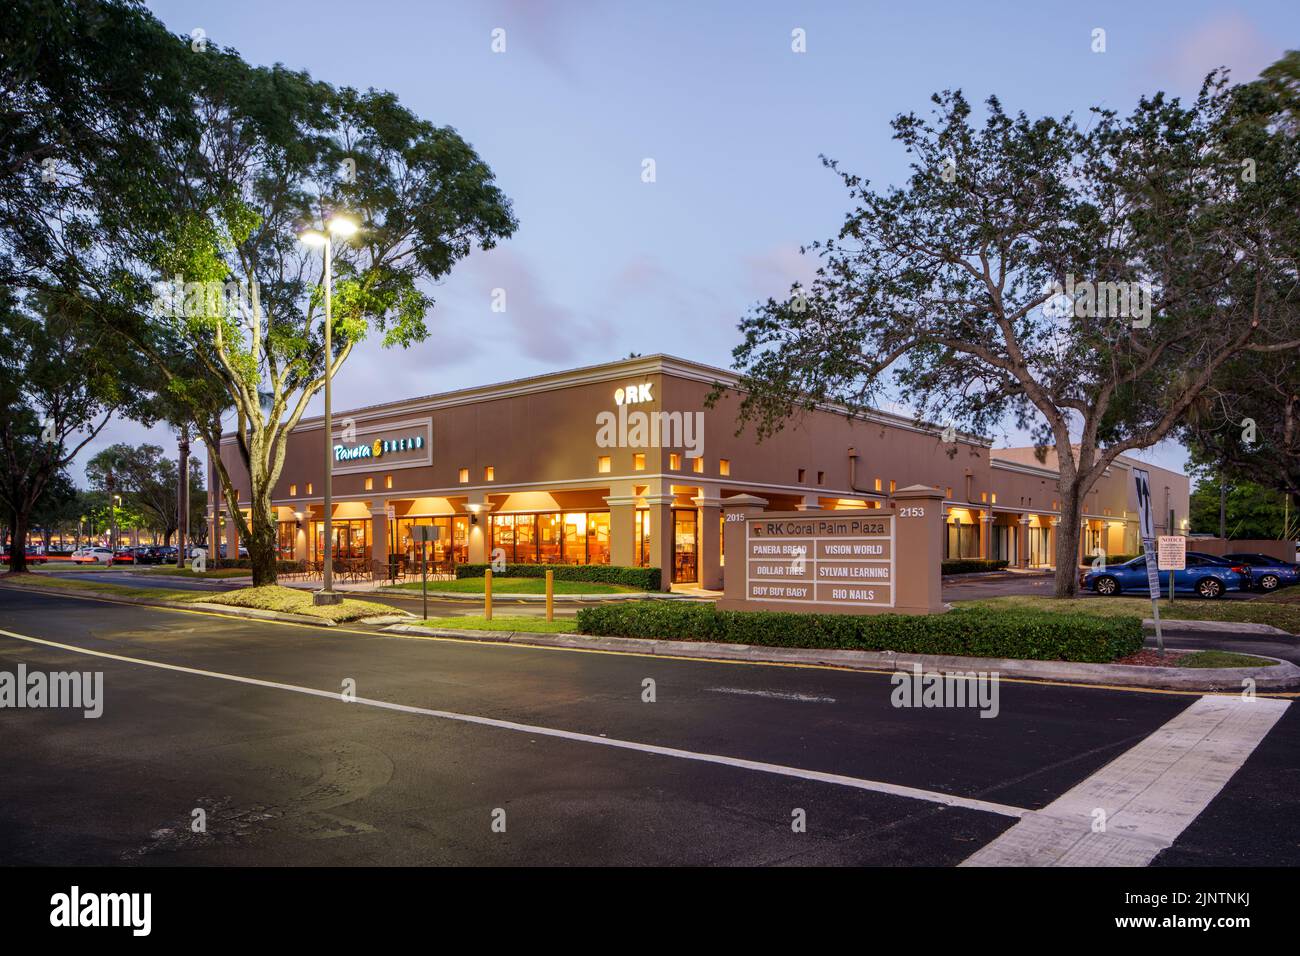 JACKSONVILLE, FL/USA - OCTOBER 25, 2016: Panera Bread Restaurant Exterior.  Panera Bread Is A Chain Of Bakery-casual Restaurants In The United States  And Canada. Stock Photo, Picture and Royalty Free Image. Image 64754190.